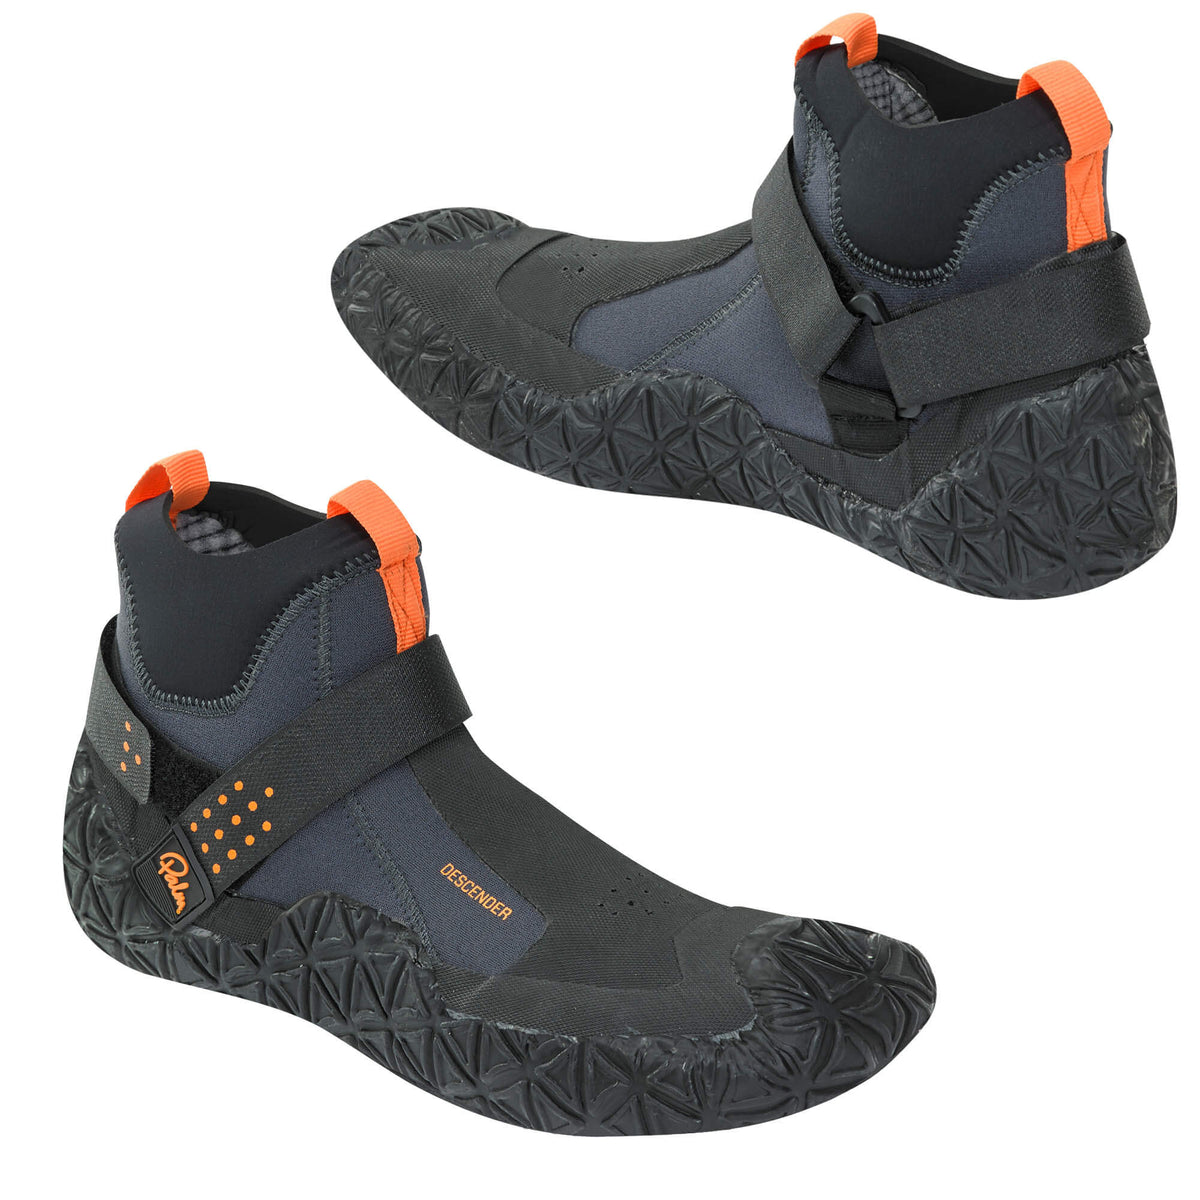 Palm Descender Shoes | Canoe and Kayak Store